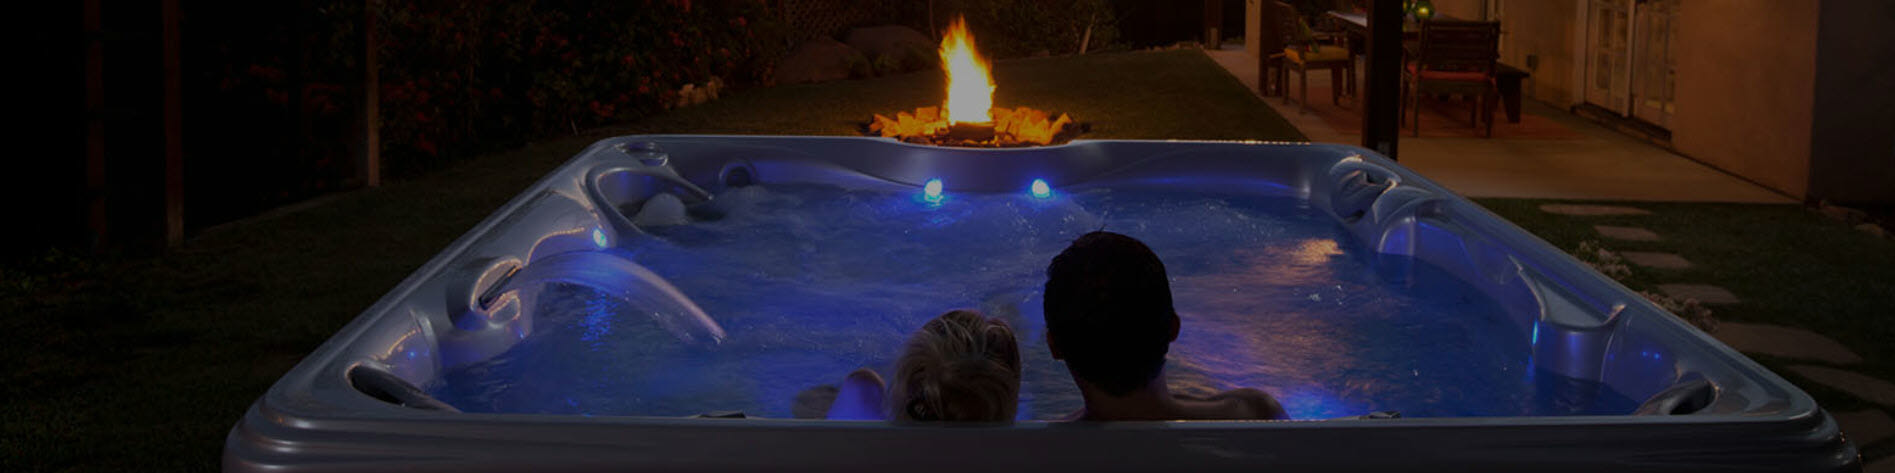 How to Use a Home Spa to Get the Sleep You Deserve, Hot Tub Sale Janesville